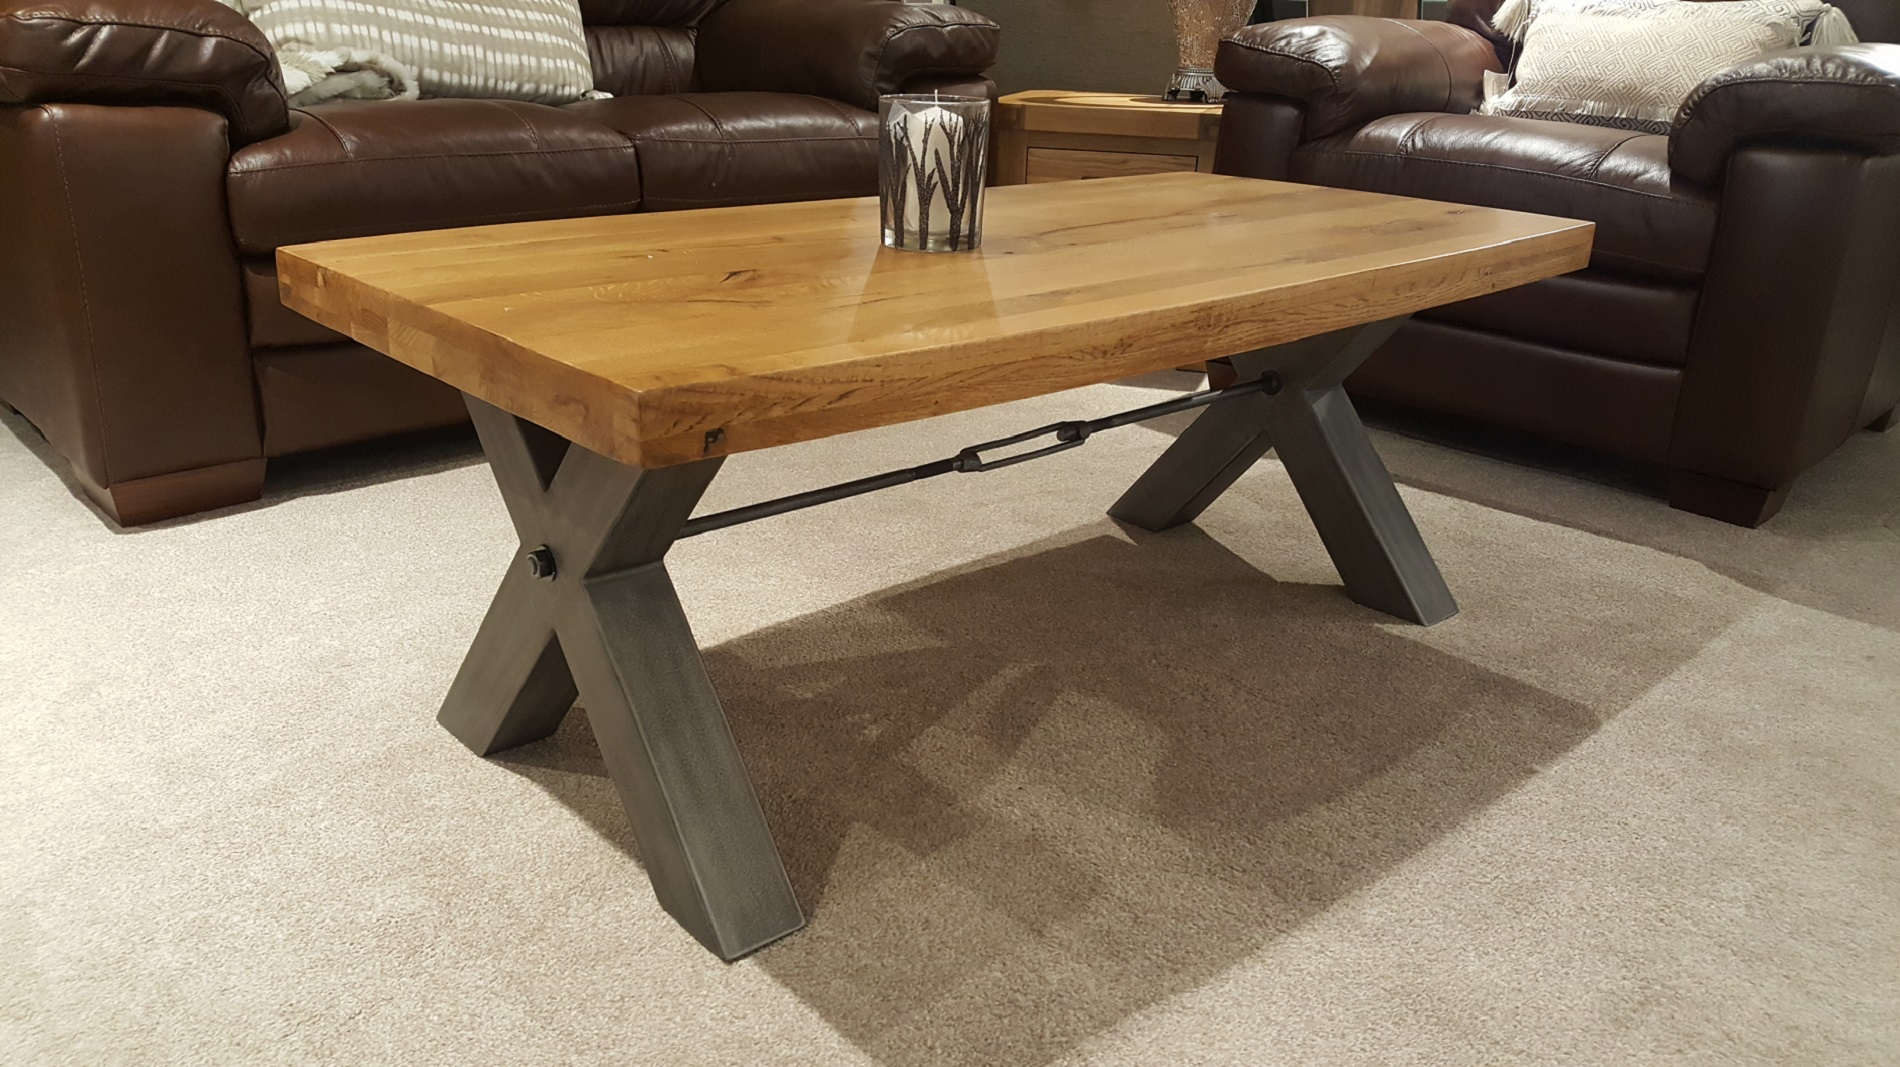 Original Oak Coffee Table Upstairs Downstairs intended for measurements 1900 X 1067